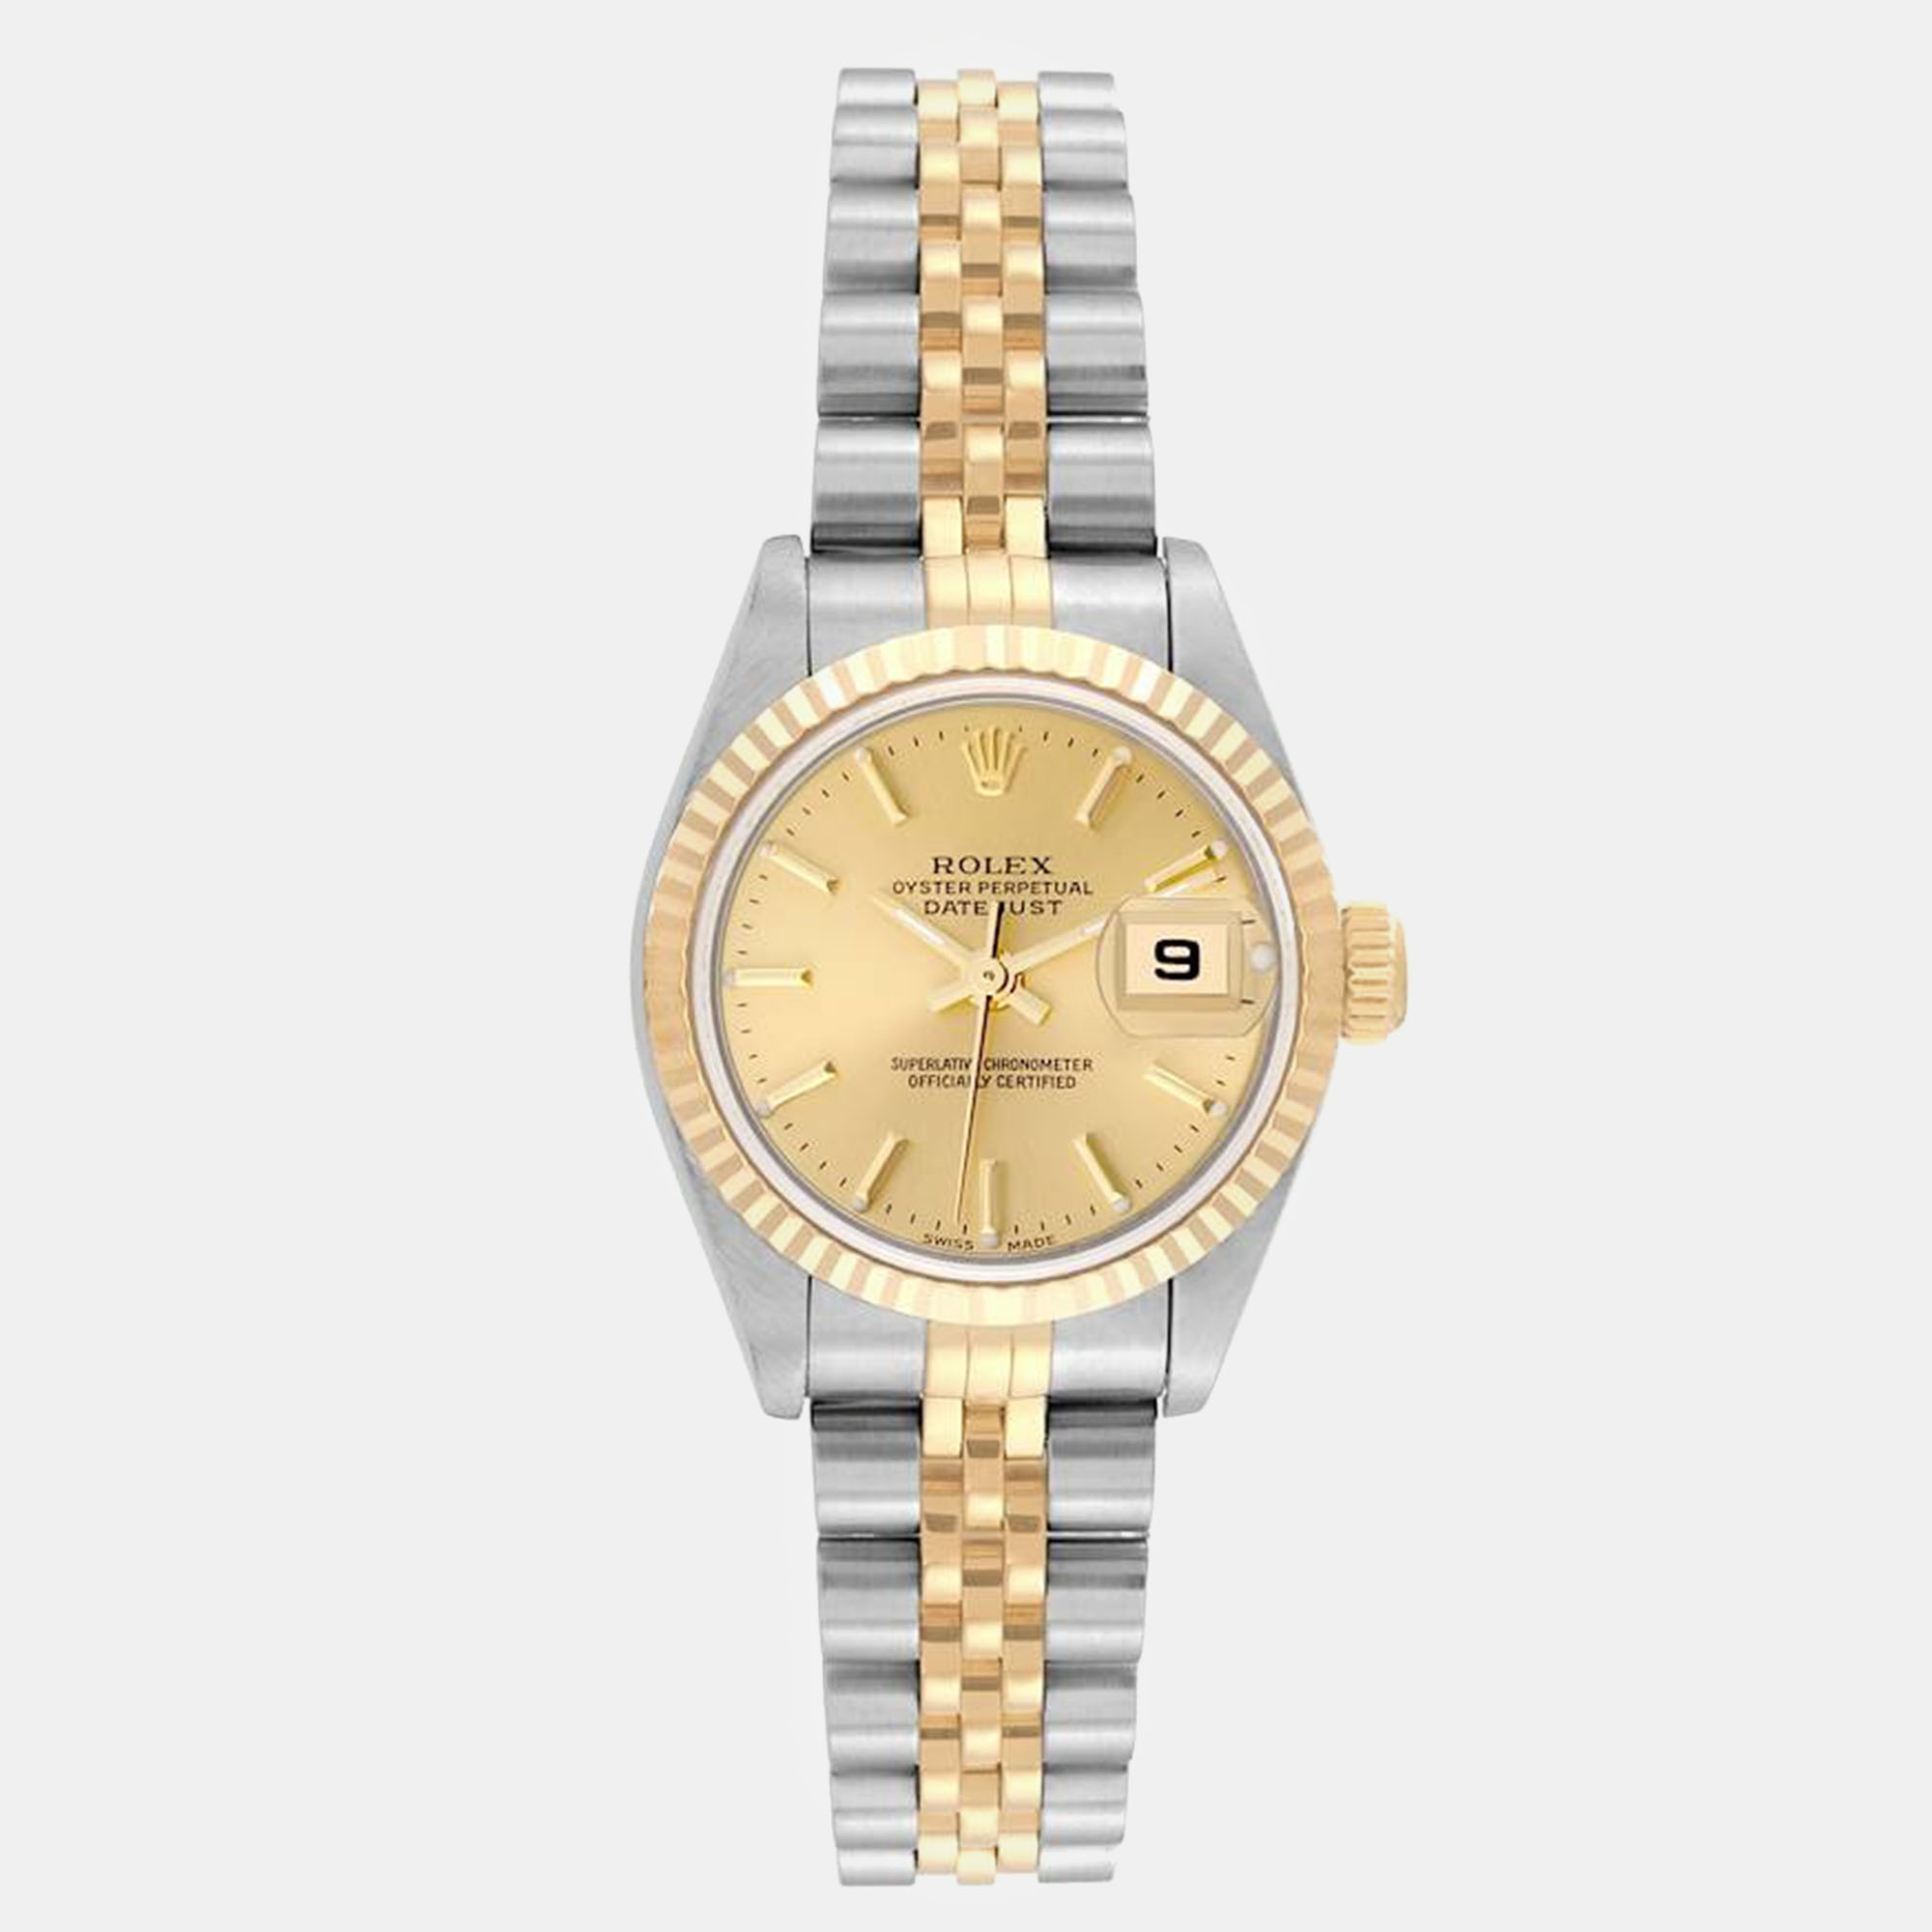 Rolex datejust steel yellow gold champagne dial ladies watch 26.0 mm